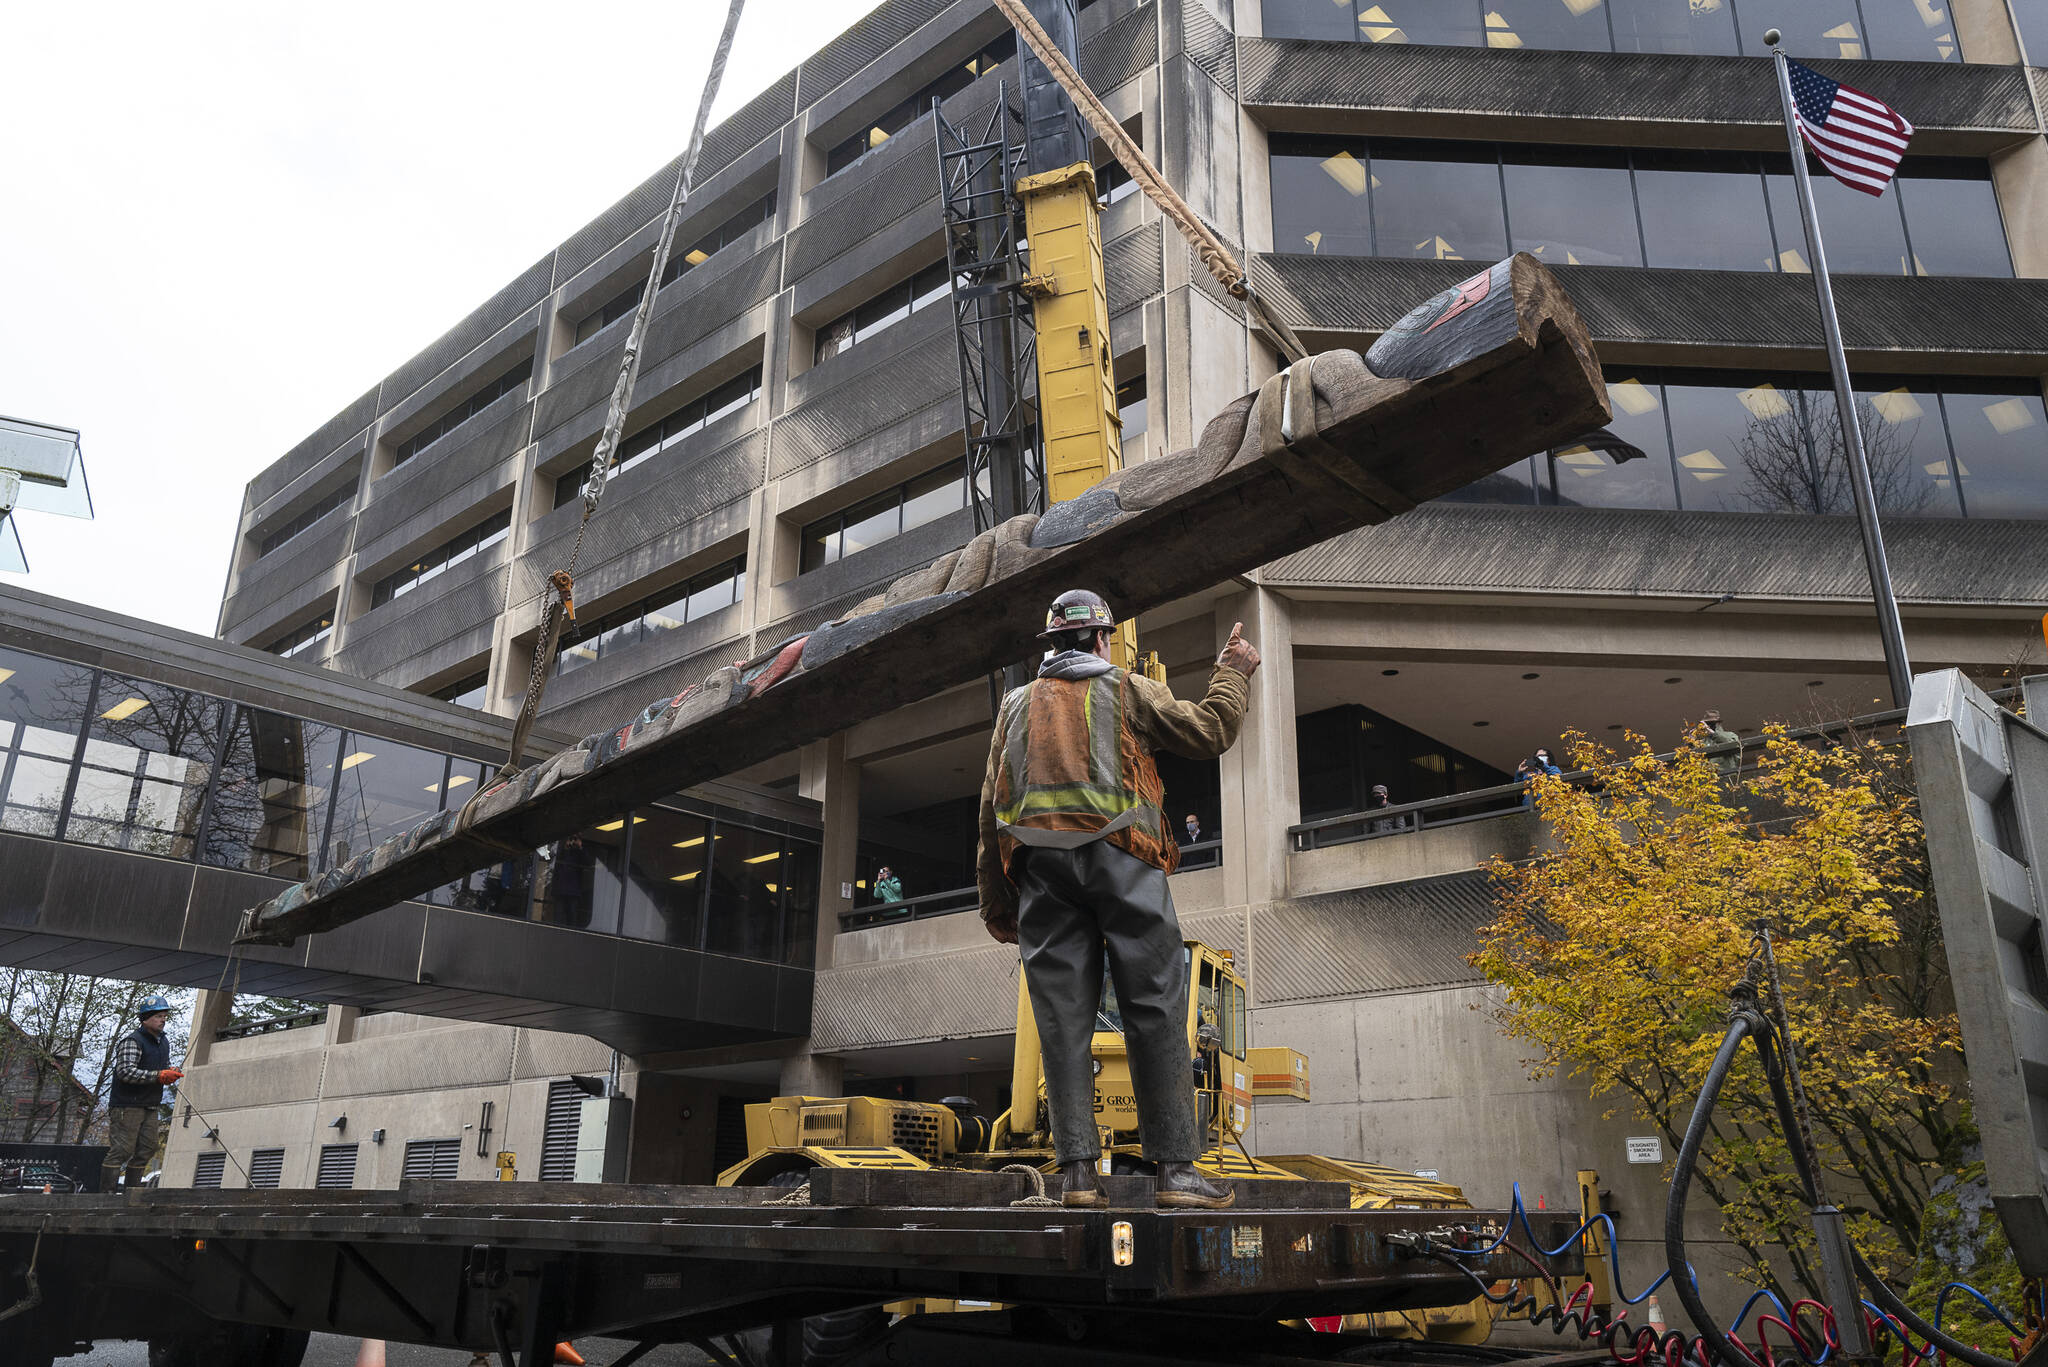 photo by Michael Penn / For the Jundeau-Douglas City Museum
It took two forklifts, a large crane, a flatbed truck and a team of workers to move the Wooshkeetaan Kootéeyaa (totem pole) to its new location inside the atrium of the State Office Building on Oct. 15.